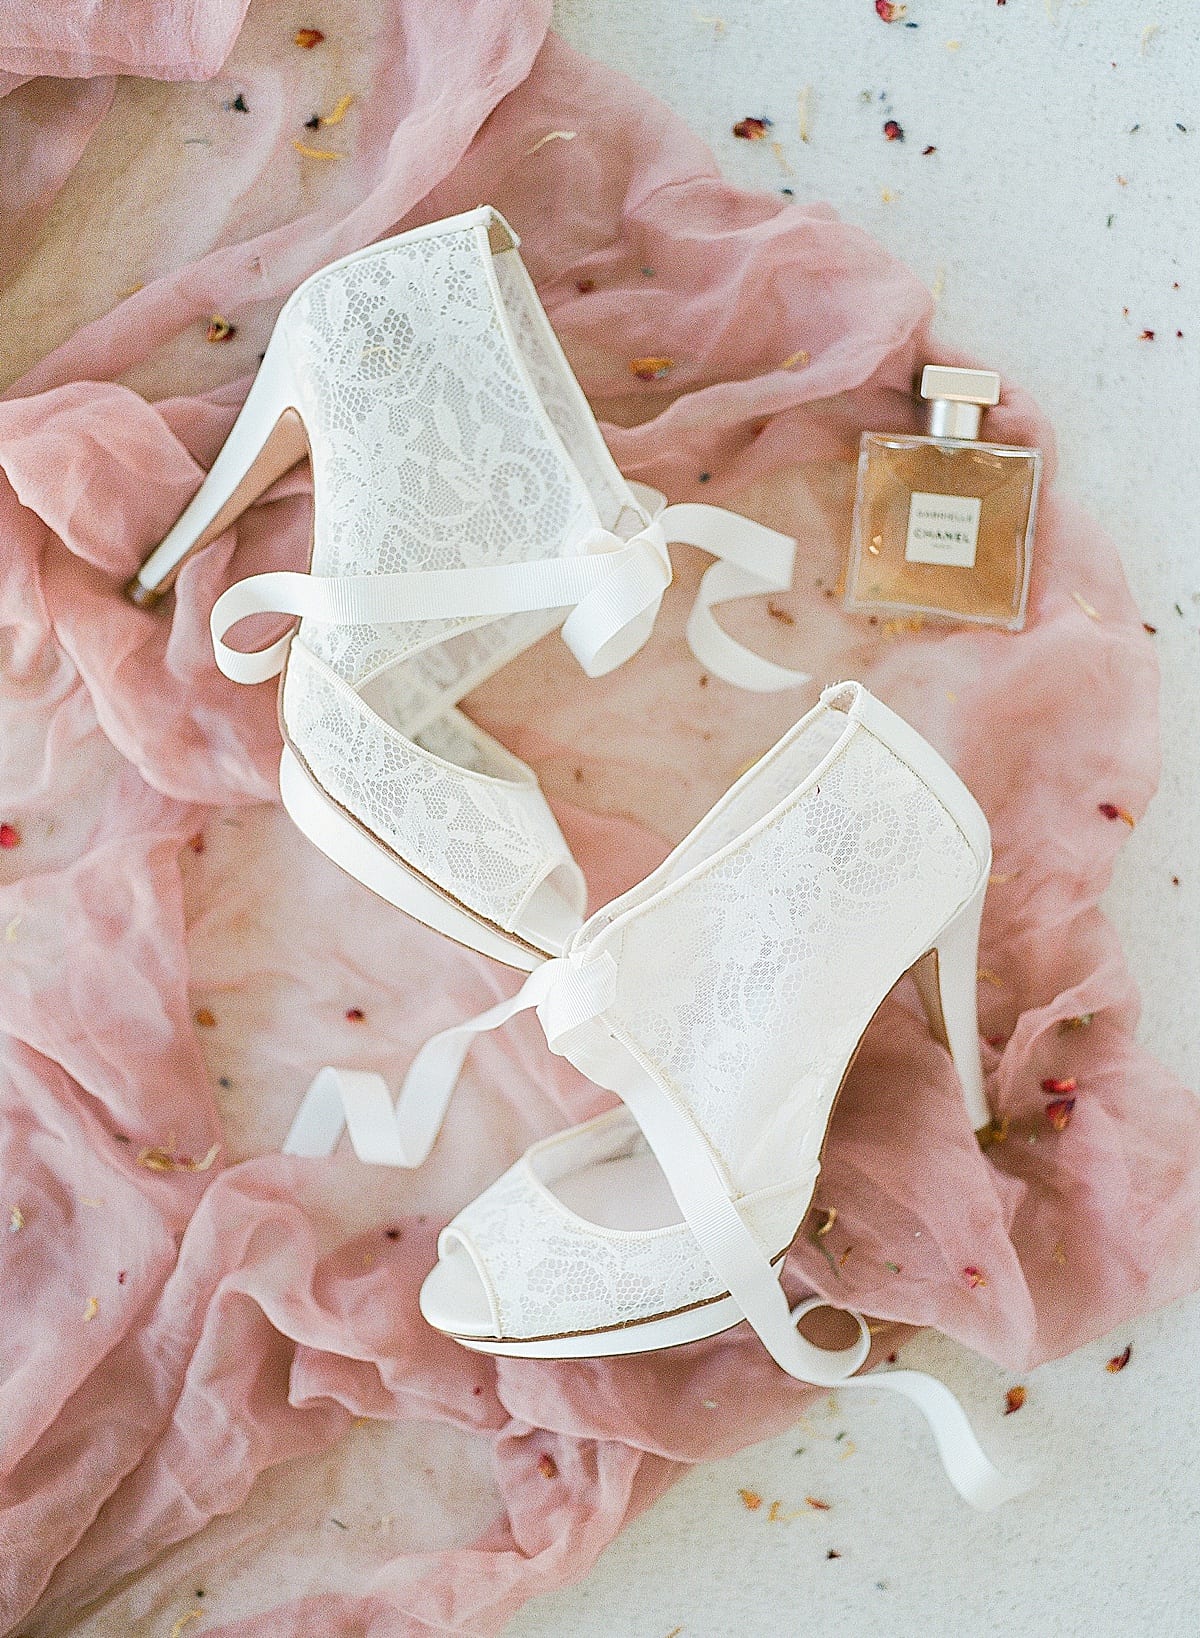 Bridal Details Shoes and Perfume on Pink Fabric